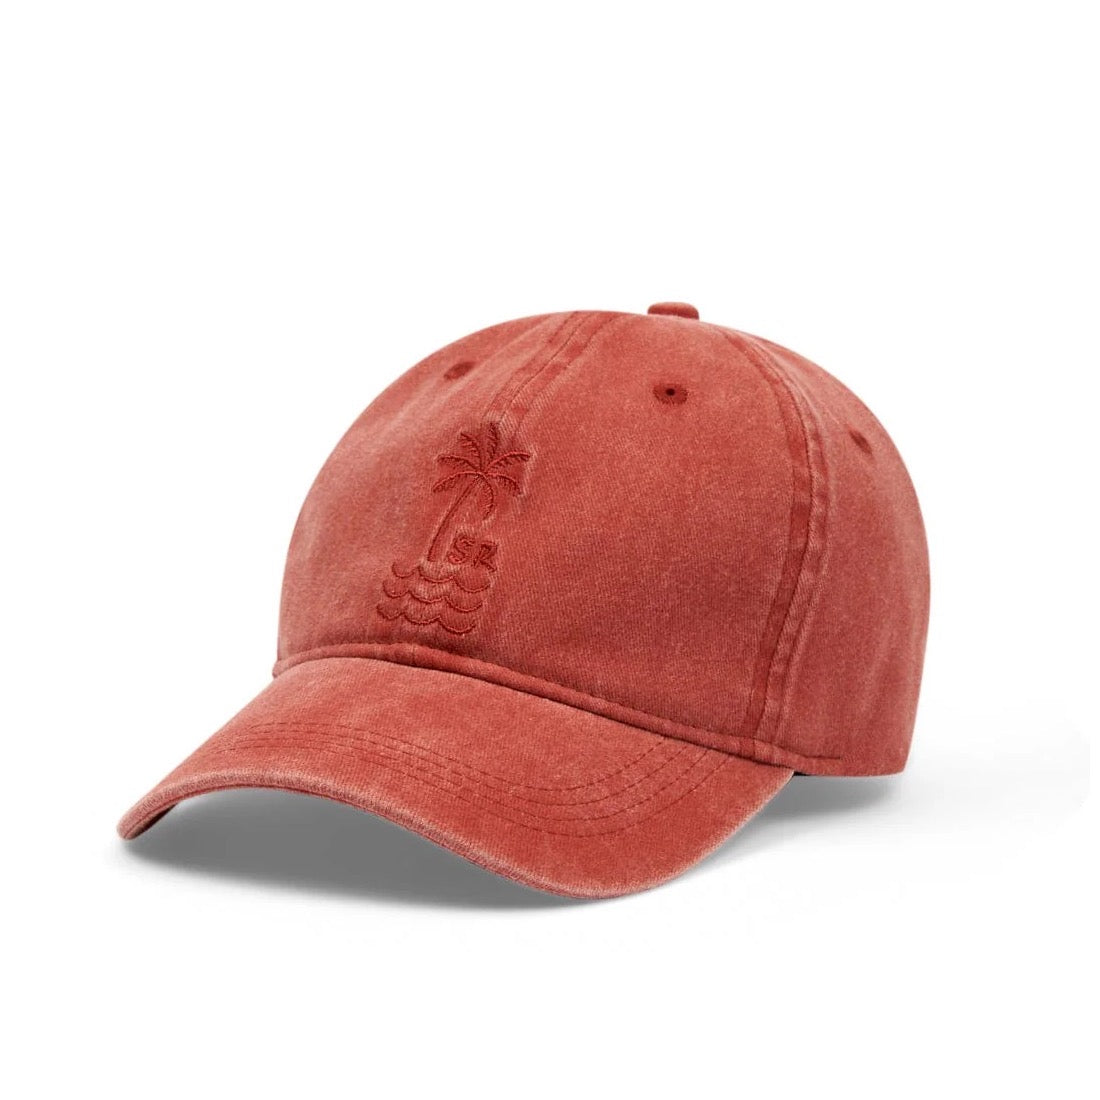 Saltrock Palm Adult Cap Rust Clothing ONE SIZE / Rust